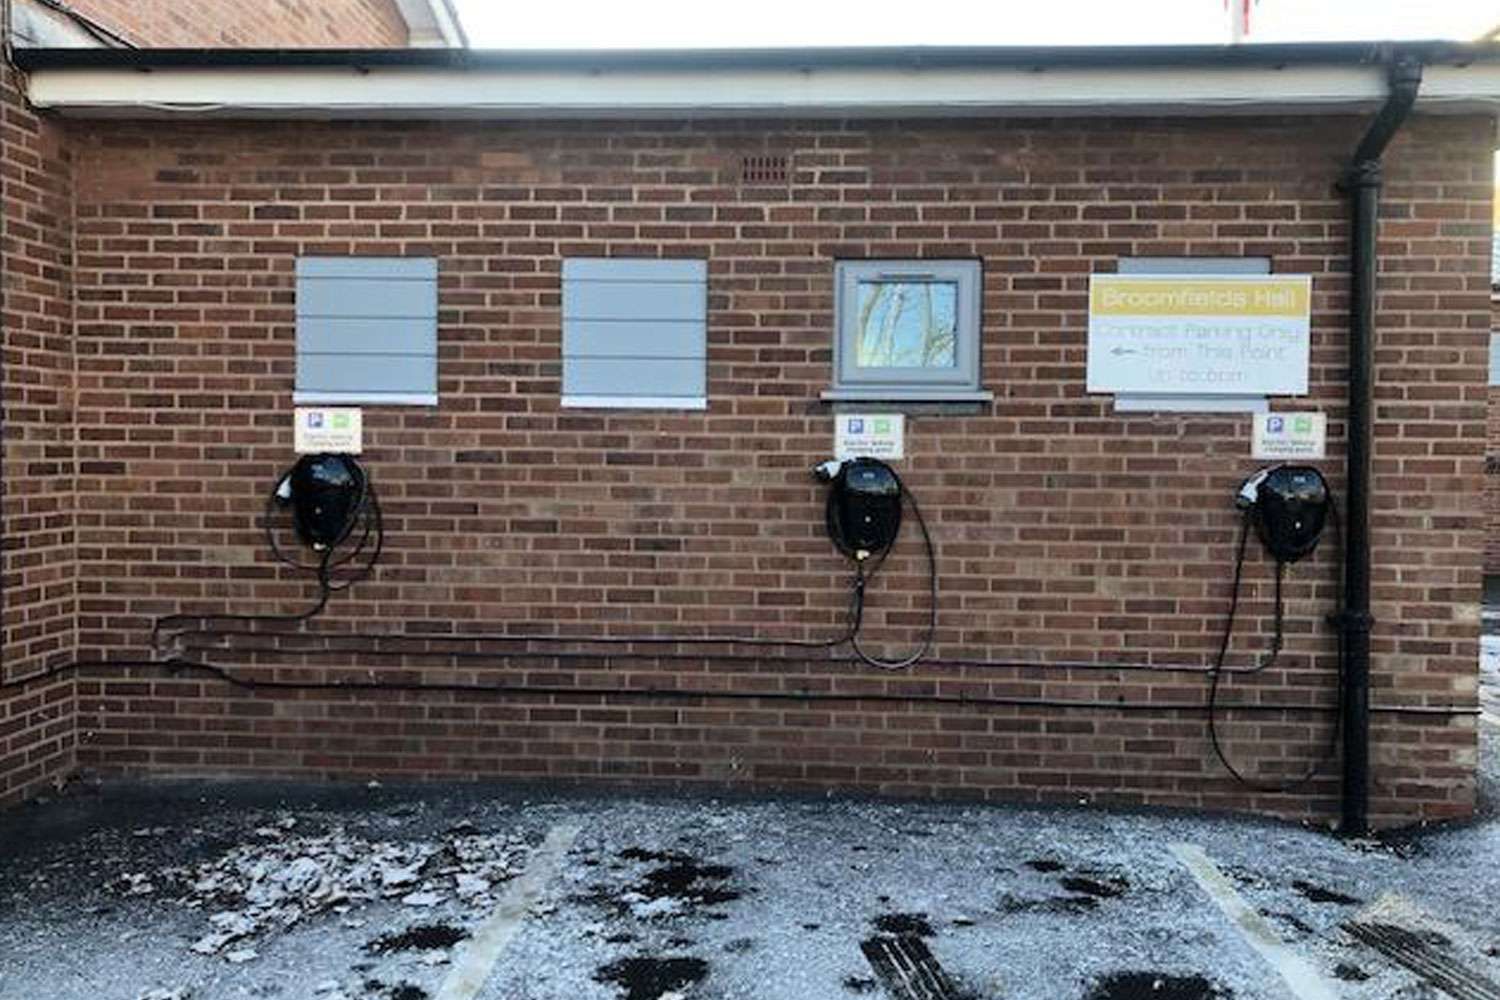 Electric Car Parking in Solihull